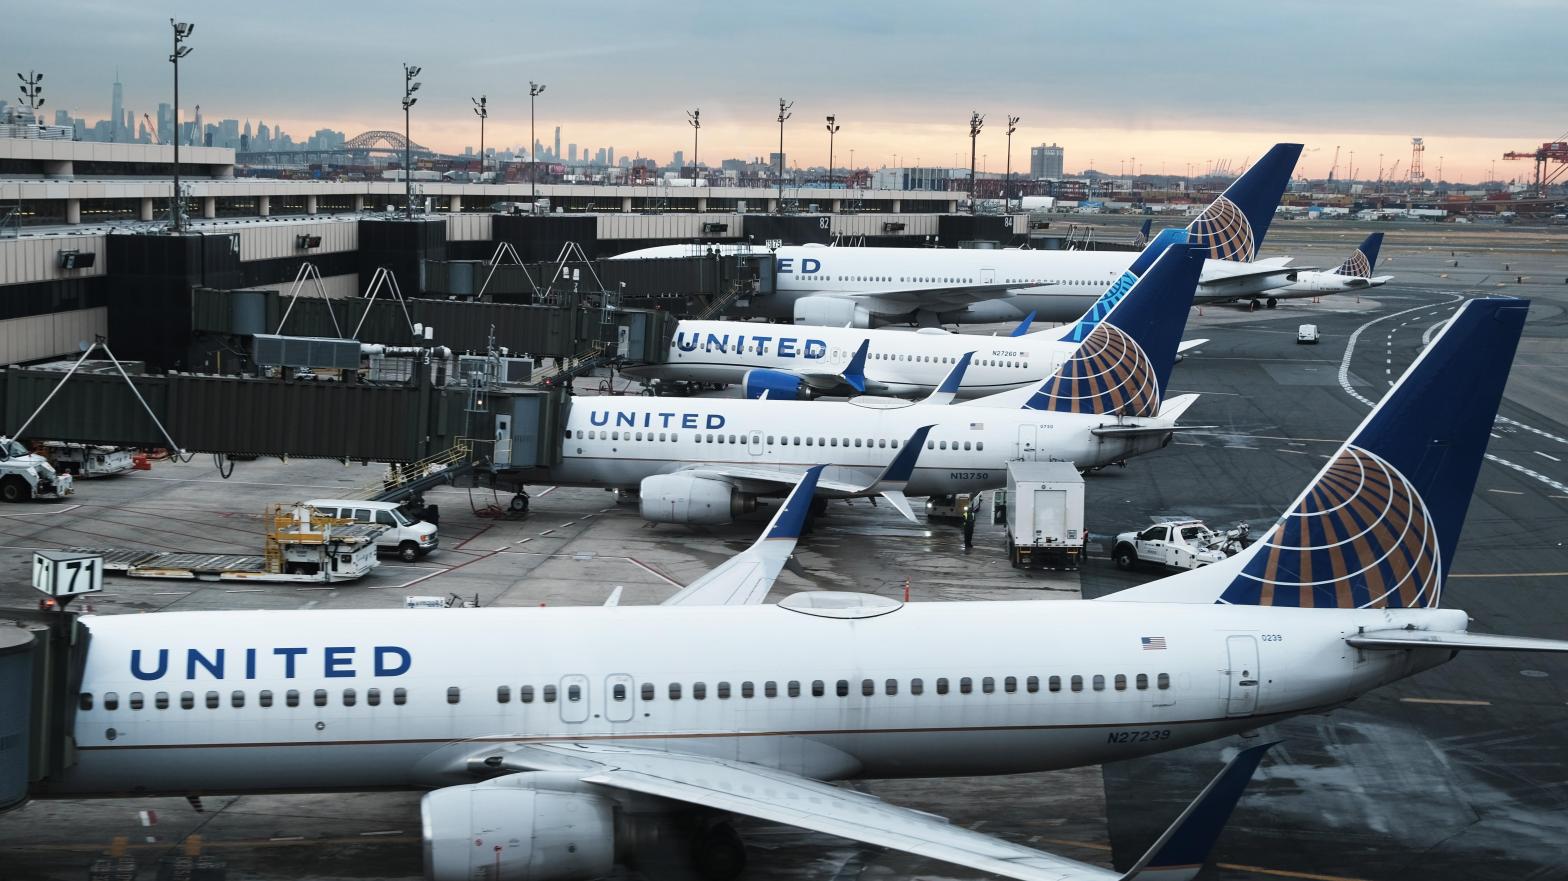 Planes await passengers at Newark Liberty International Airport. In 2006, a pilot mistakenly landed a commercial aeroplane on a taxiway at the airport instead of the designated runway (Image: Spencer Platt, Getty Images)